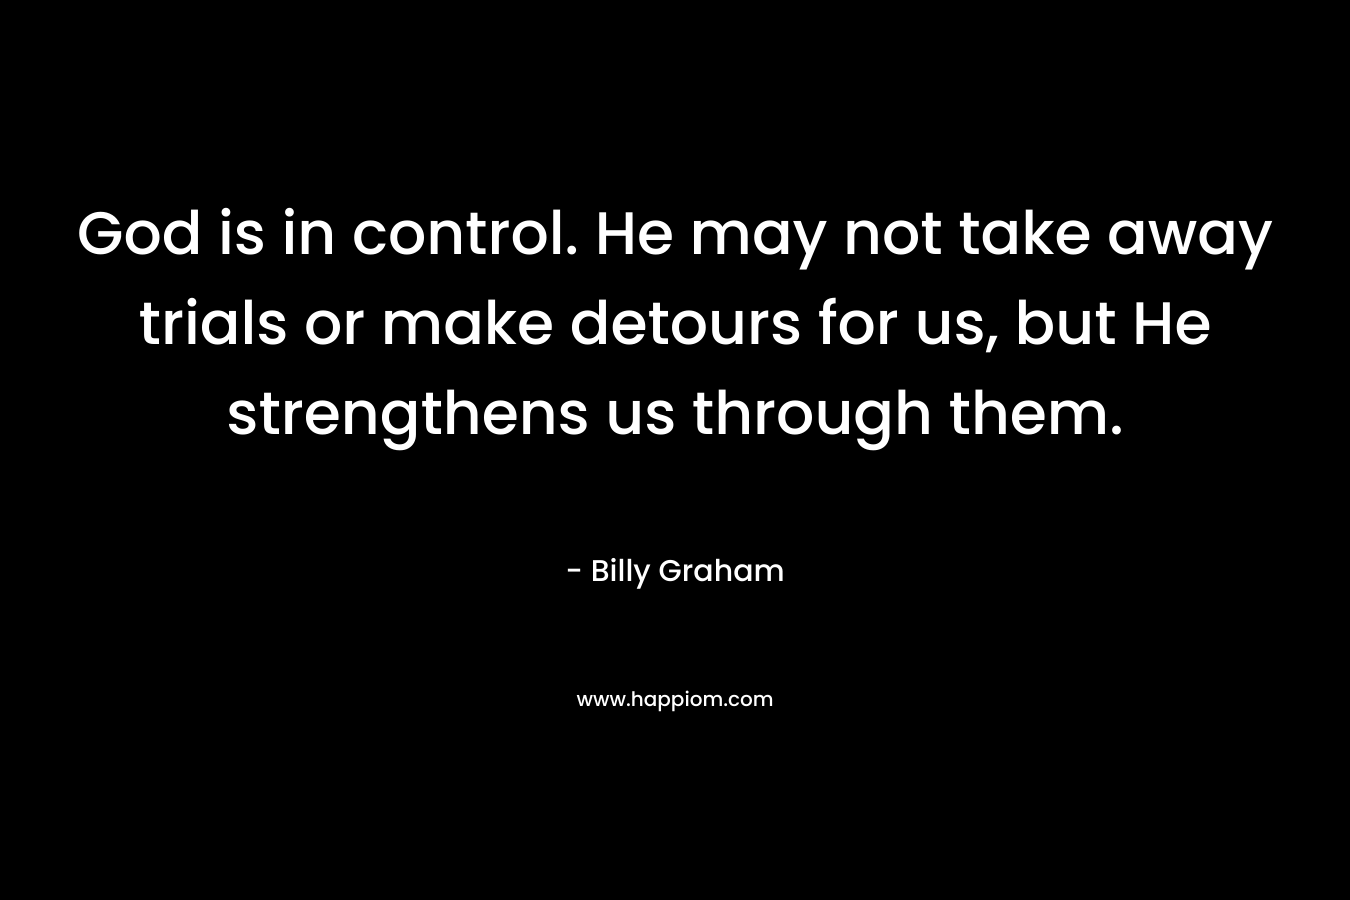 God is in control. He may not take away trials or make detours for us, but He strengthens us through them.